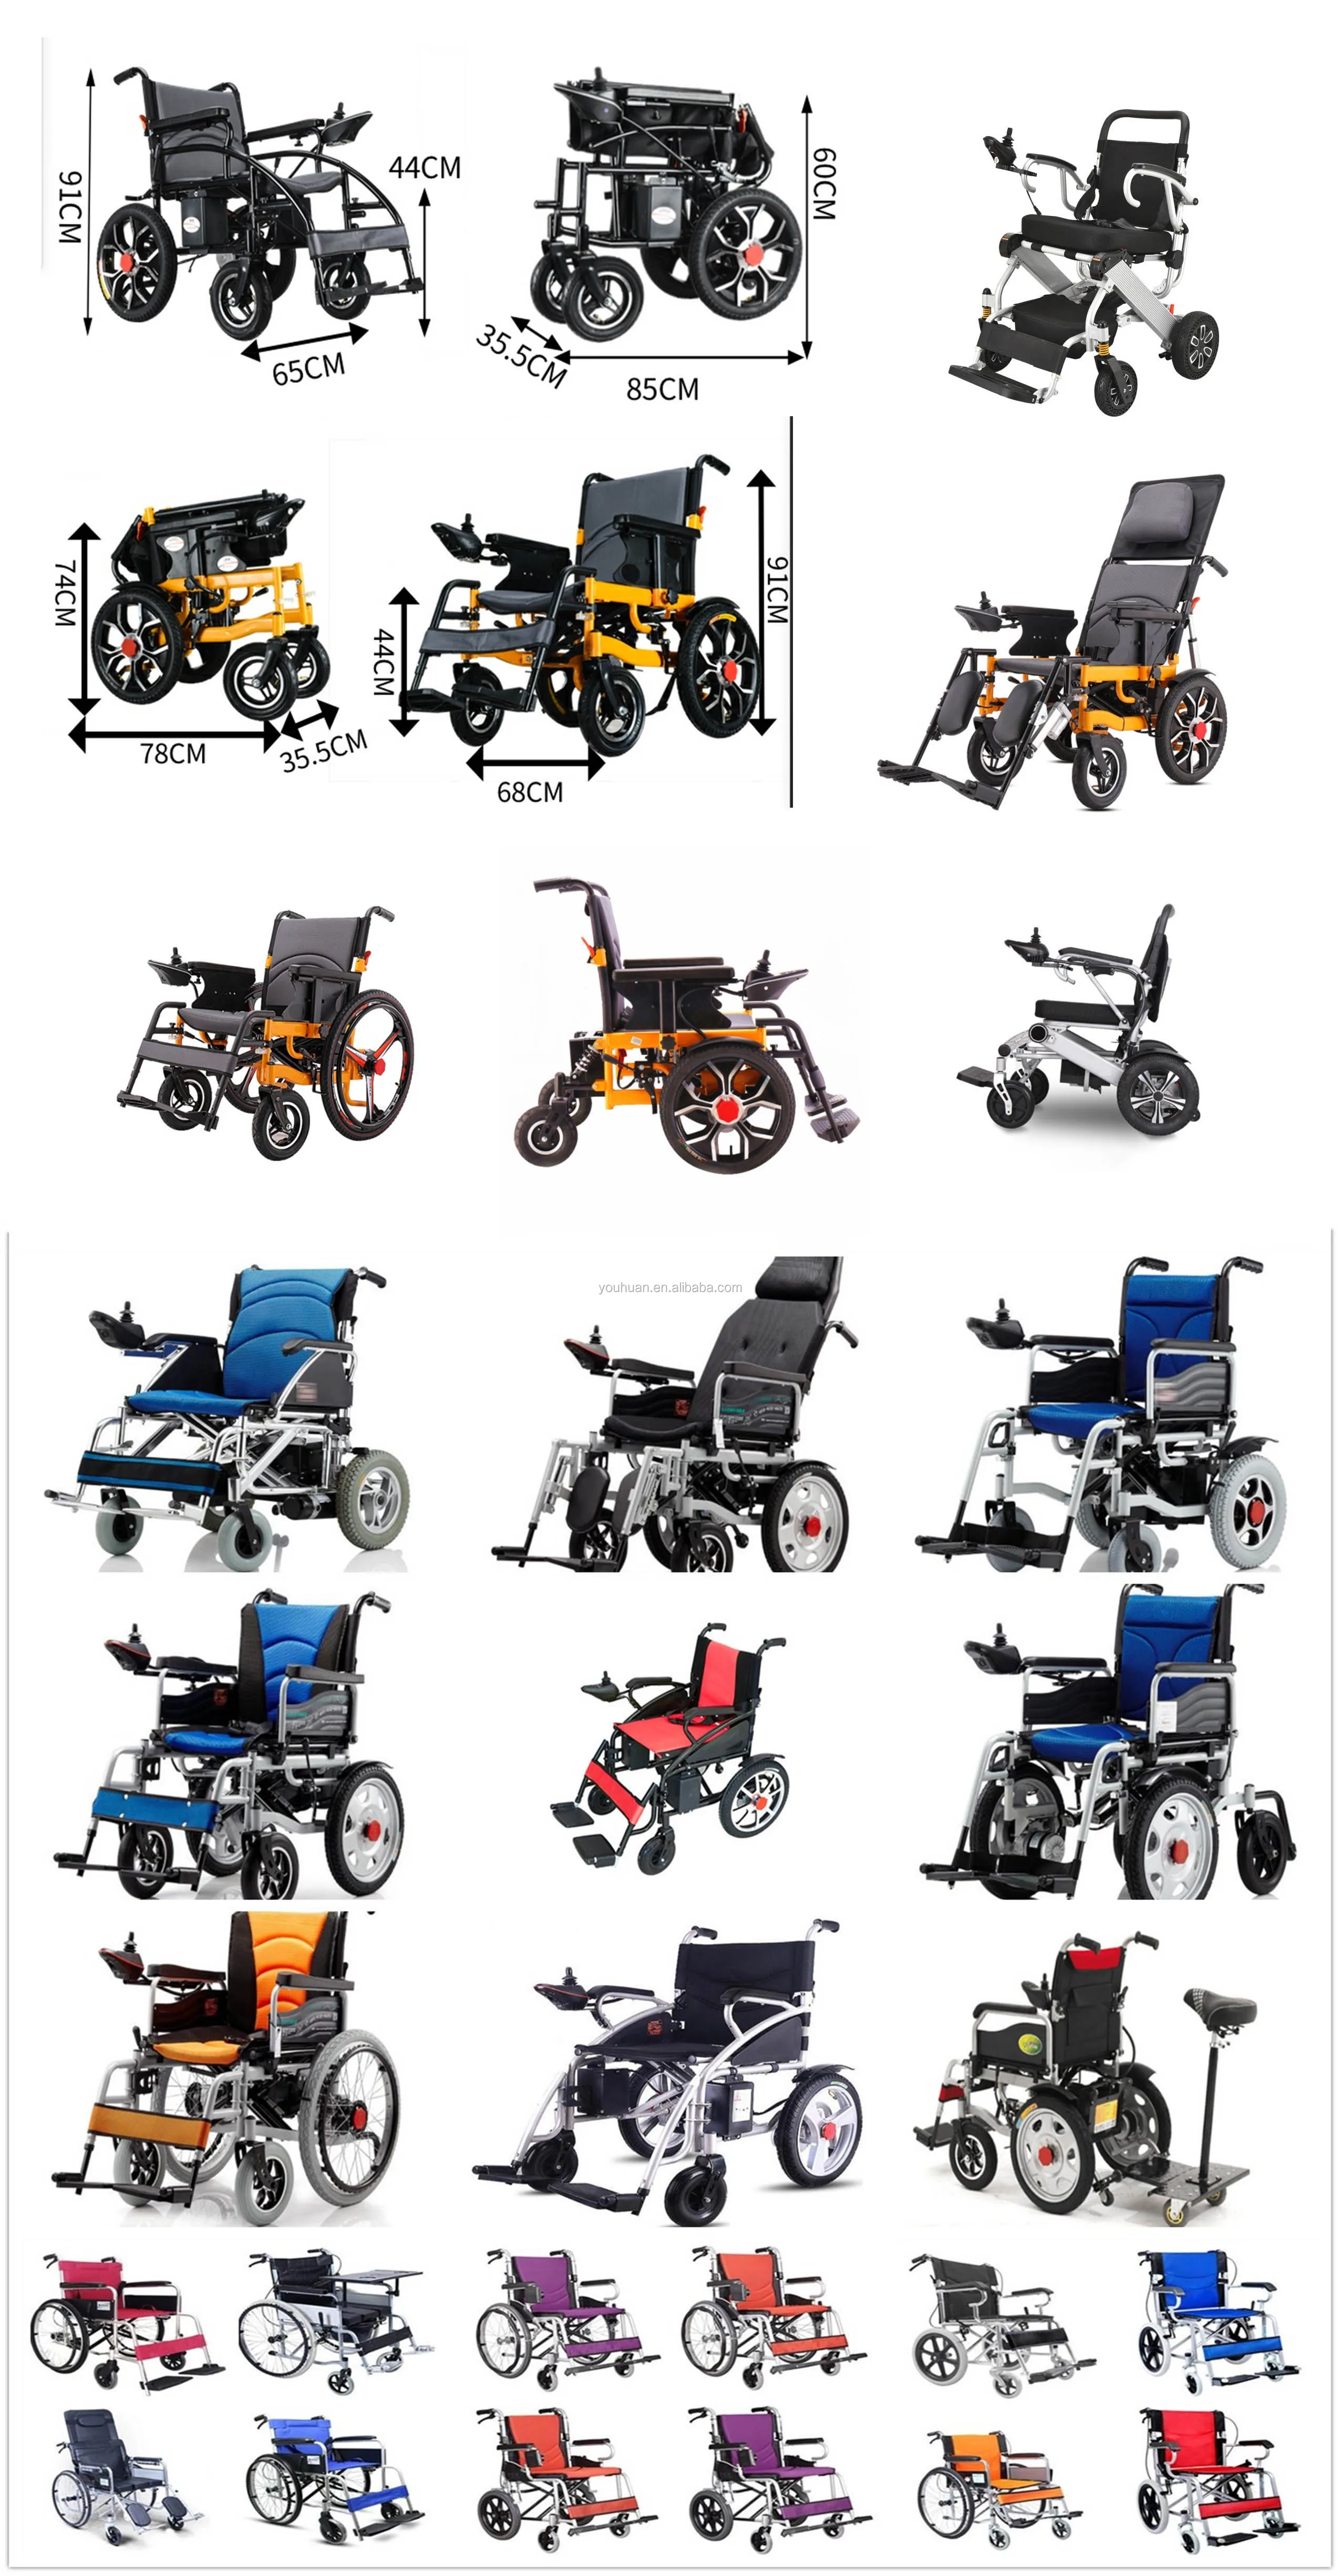 Portable and one step to use wheel chair manual wheelchair for elderly and disable use